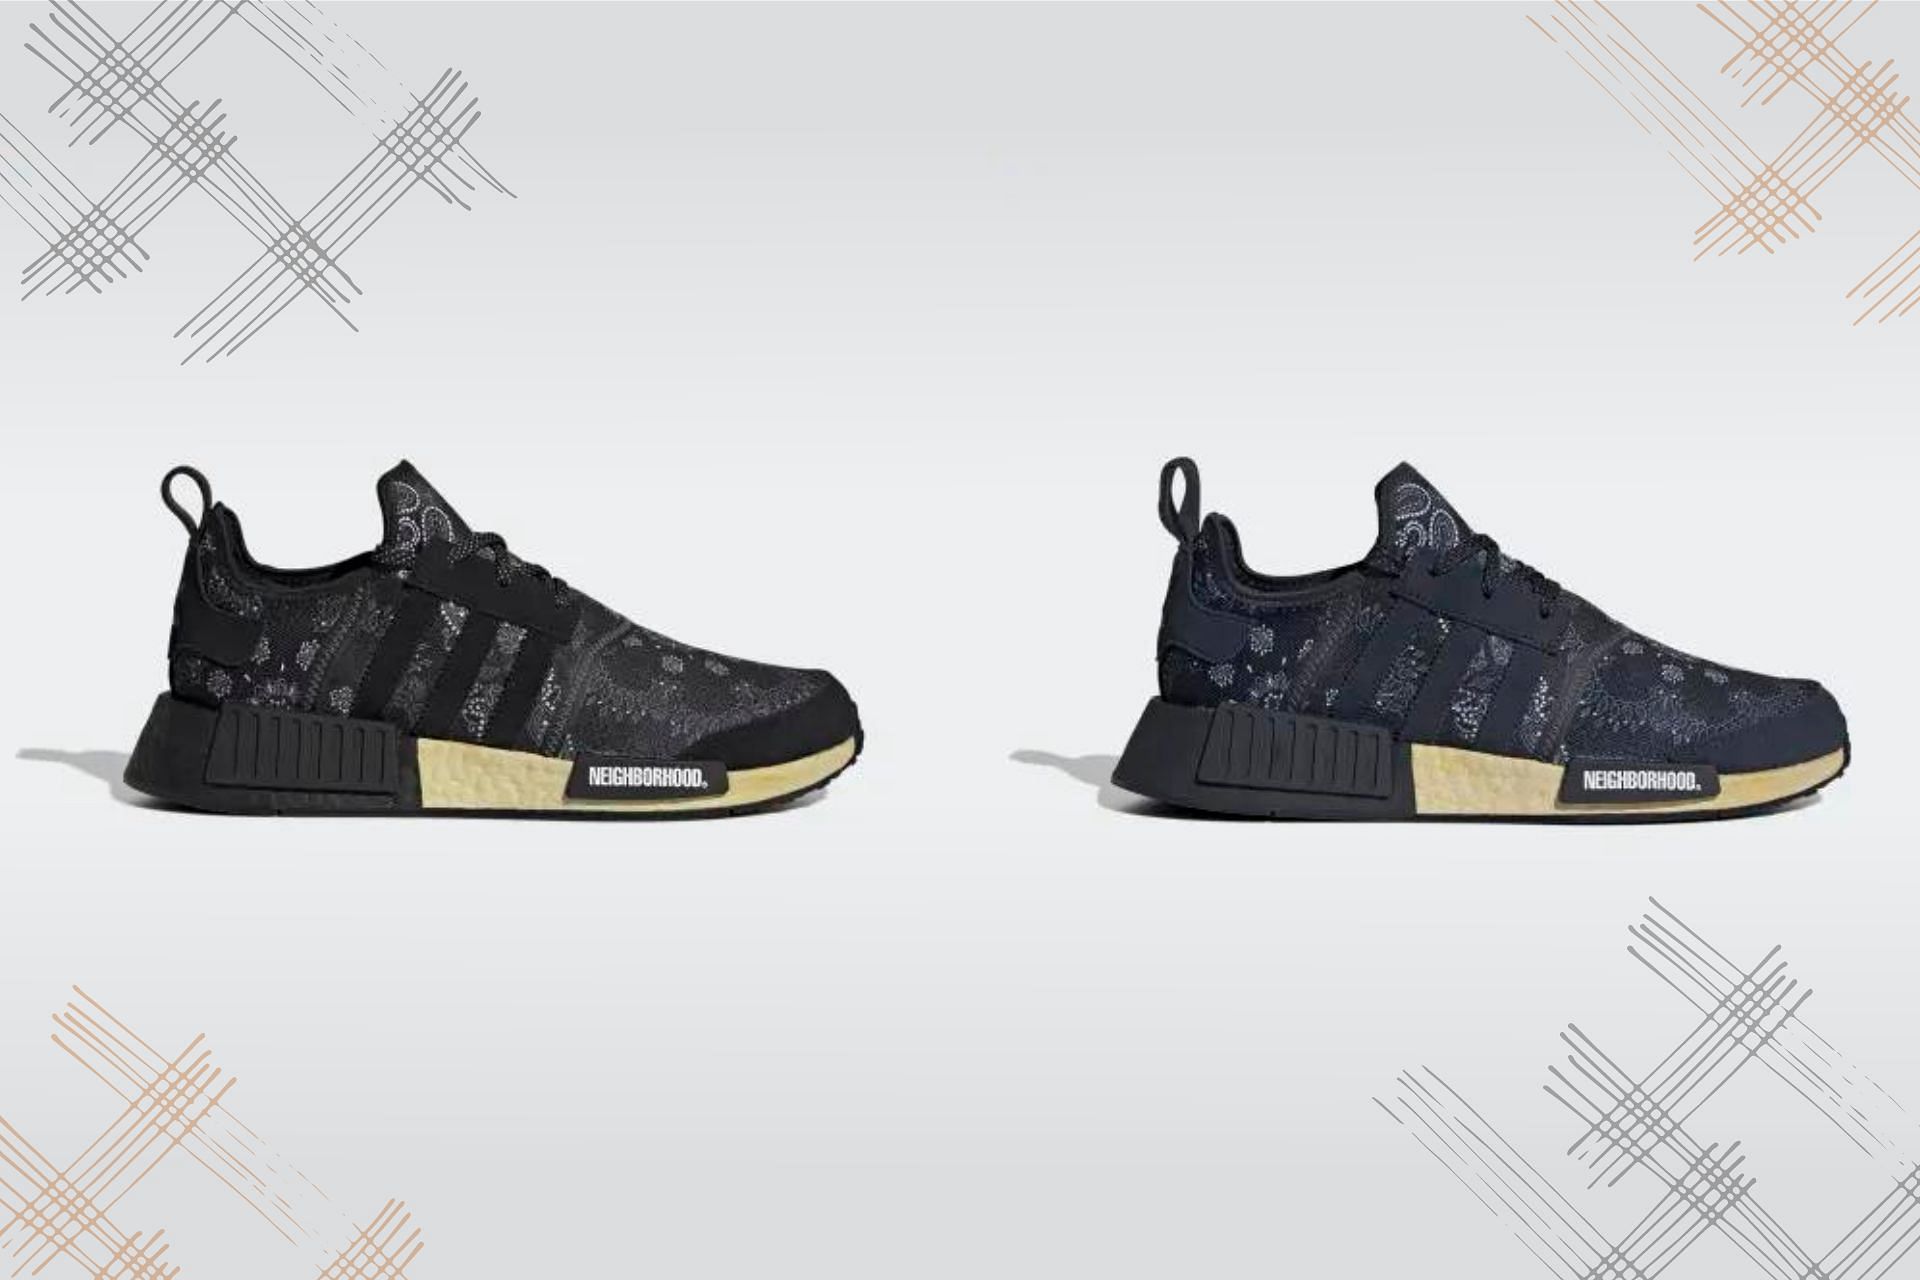 jordskælv Feasibility Forberedende navn Where to buy Neighborhood x Adidas NMD R1 footwear pack? Price, release  date, and more explored